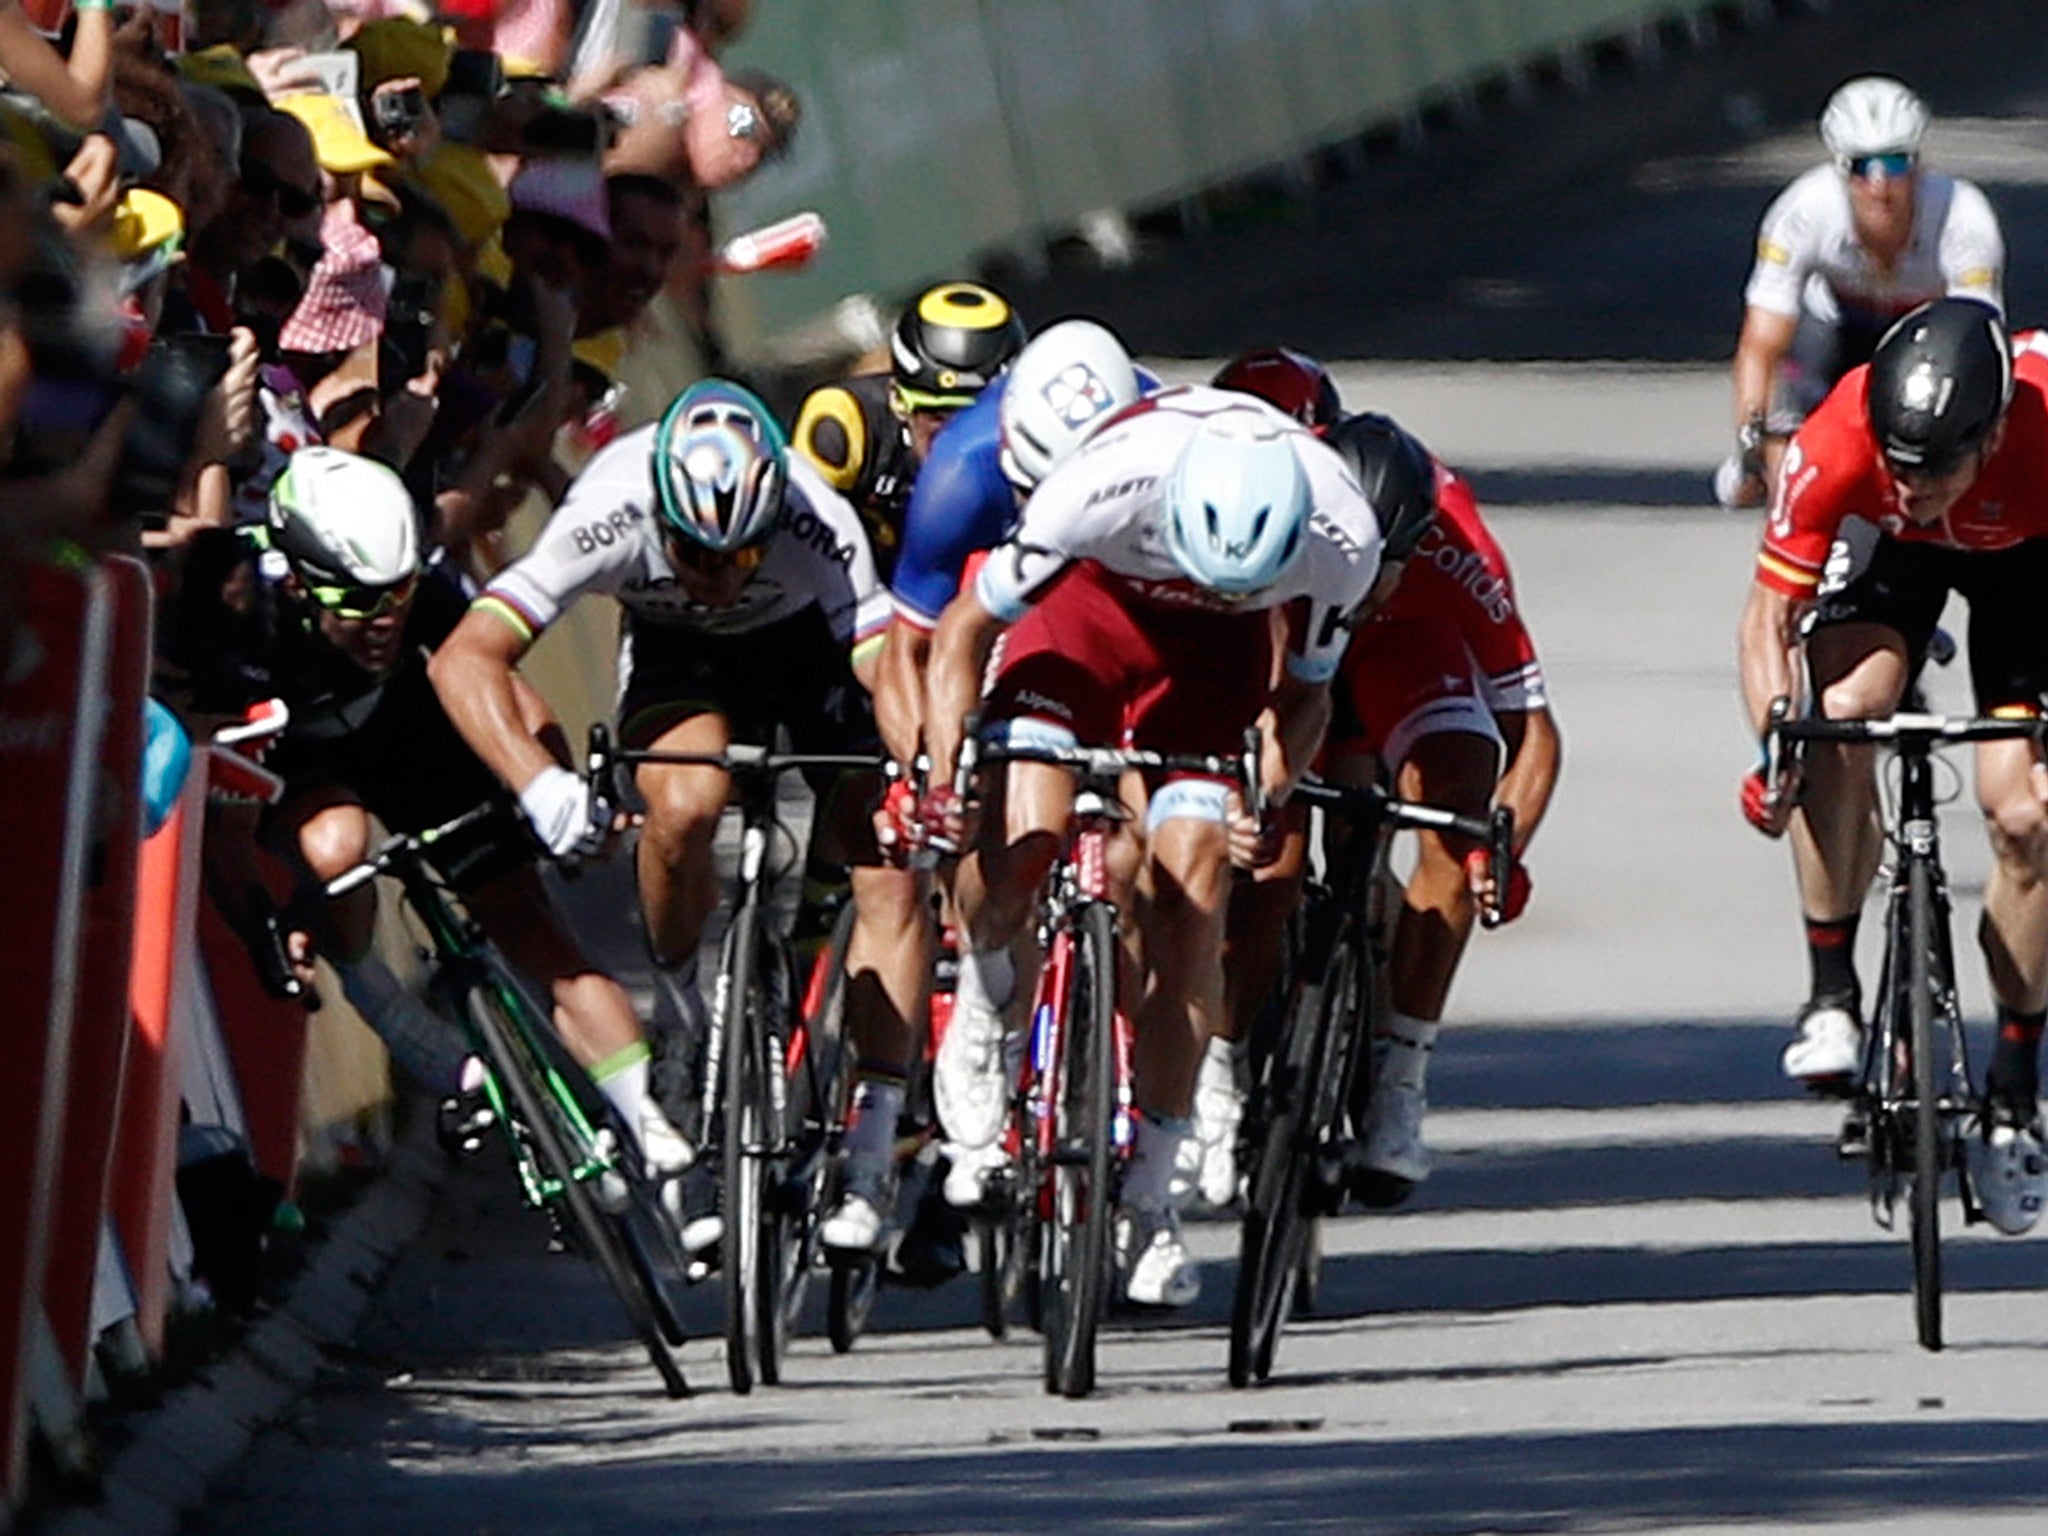 Peter Sagan appeared to push Mark Cavendish into the barriers